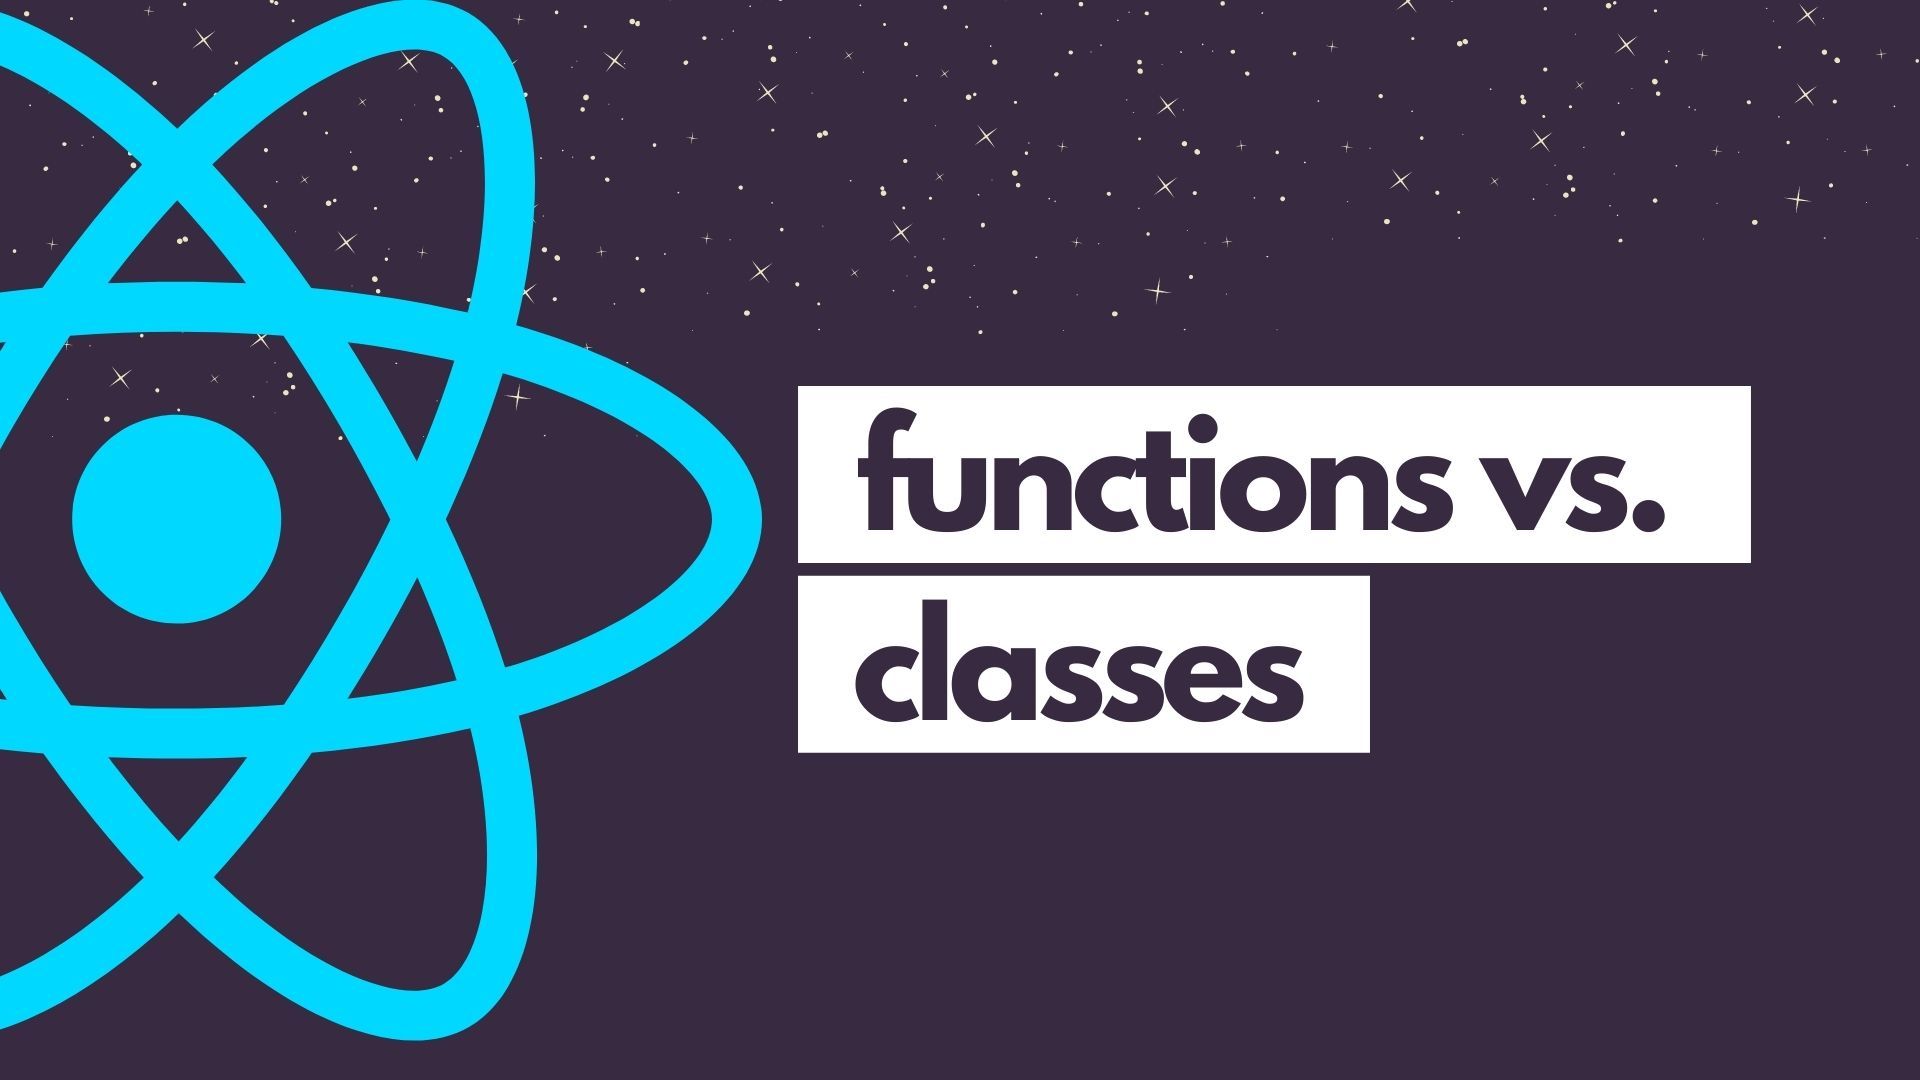 What are the differences between functions and classes in React?